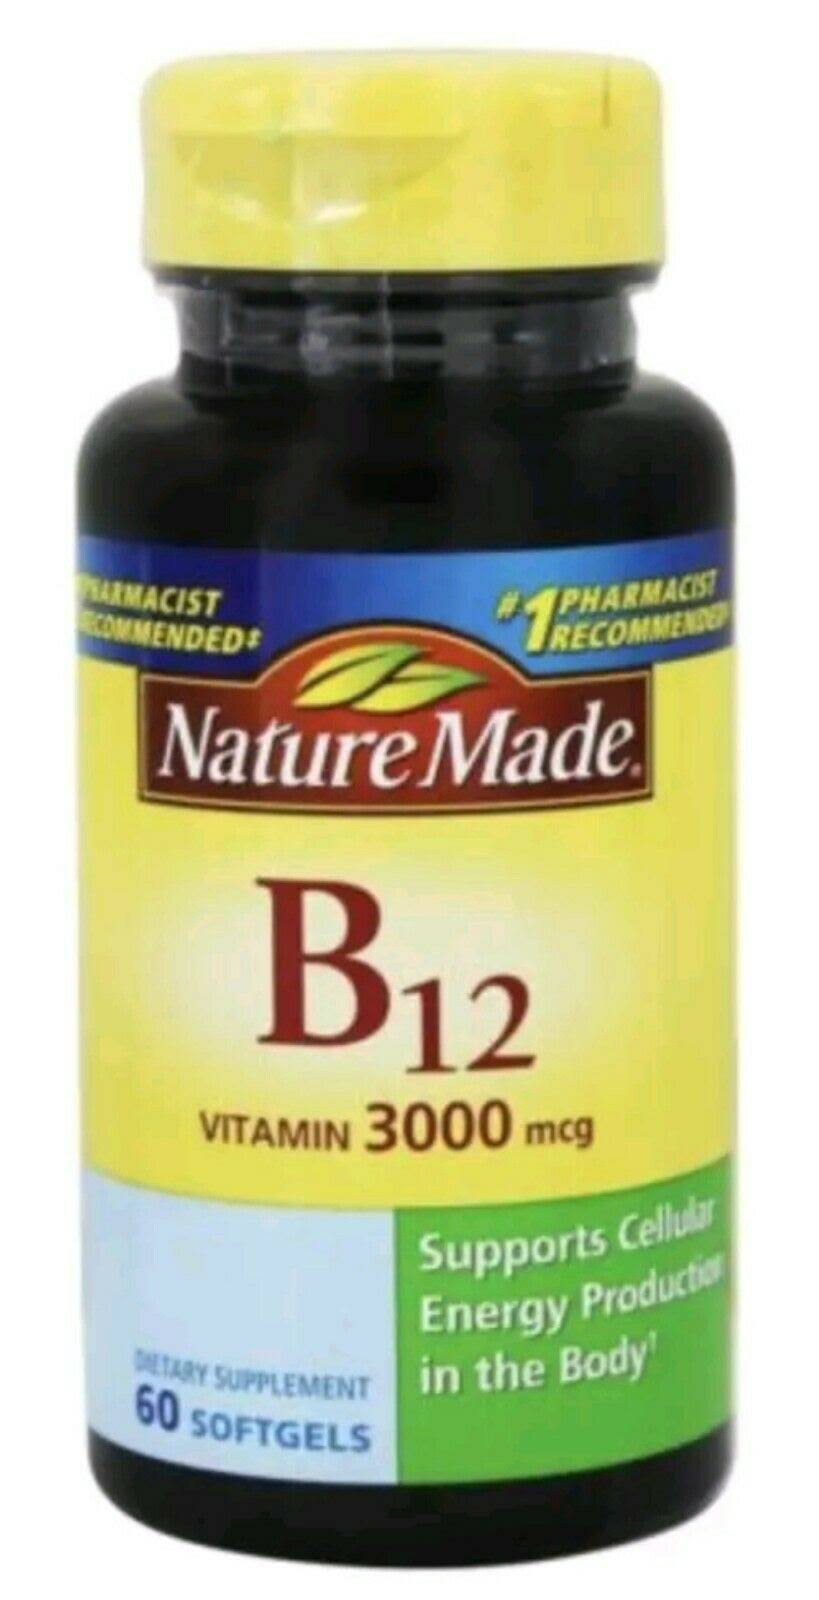 Nature Made B 12 Supplements - 60ct